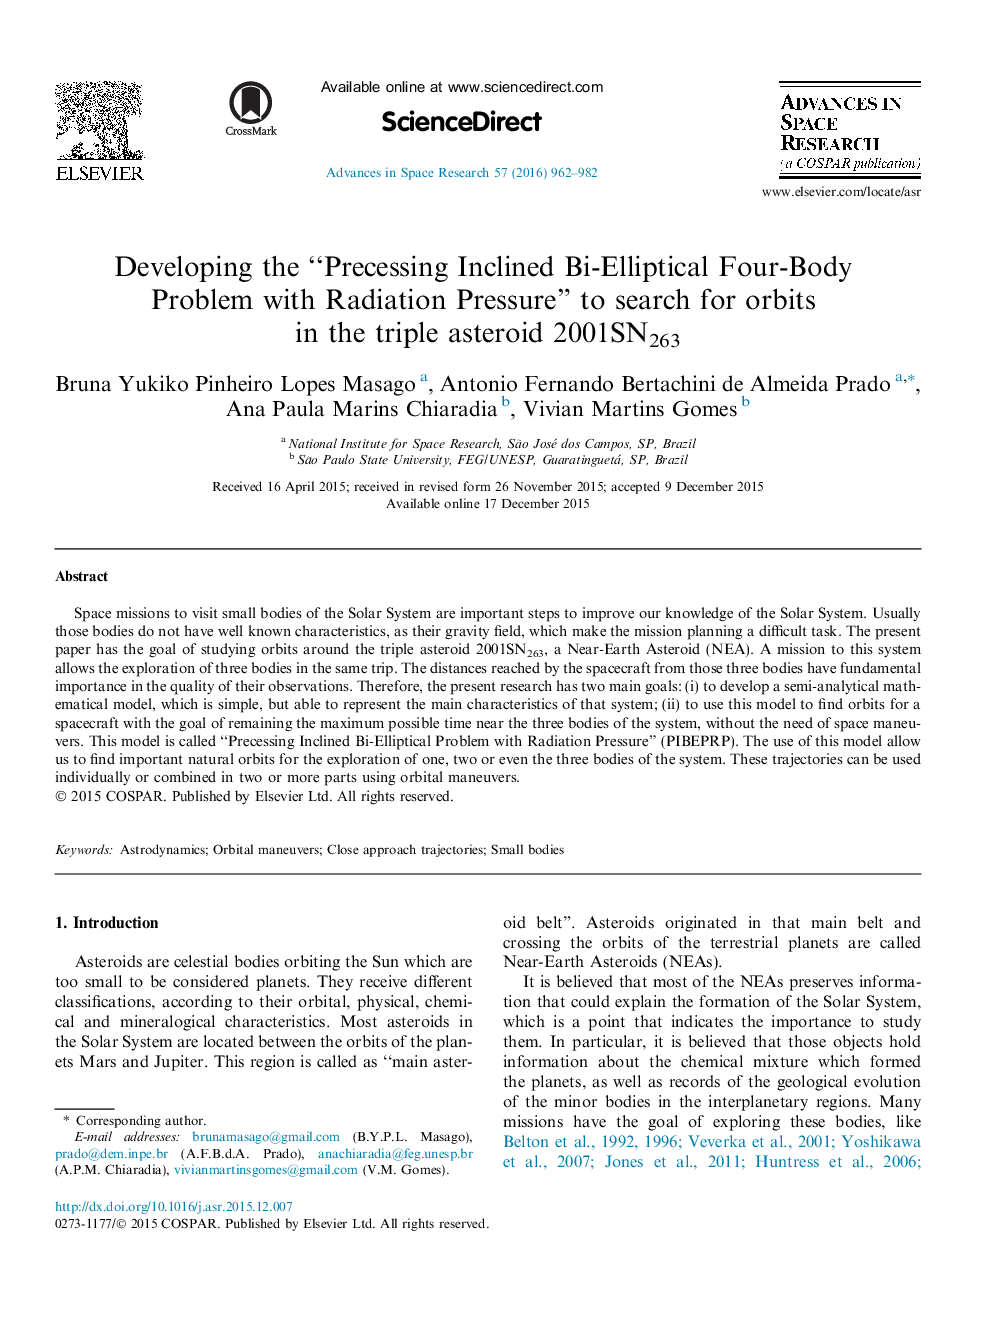 Developing the “Precessing Inclined Bi-Elliptical Four-Body Problem with Radiation Pressure” to search for orbits in the triple asteroid 2001SN263